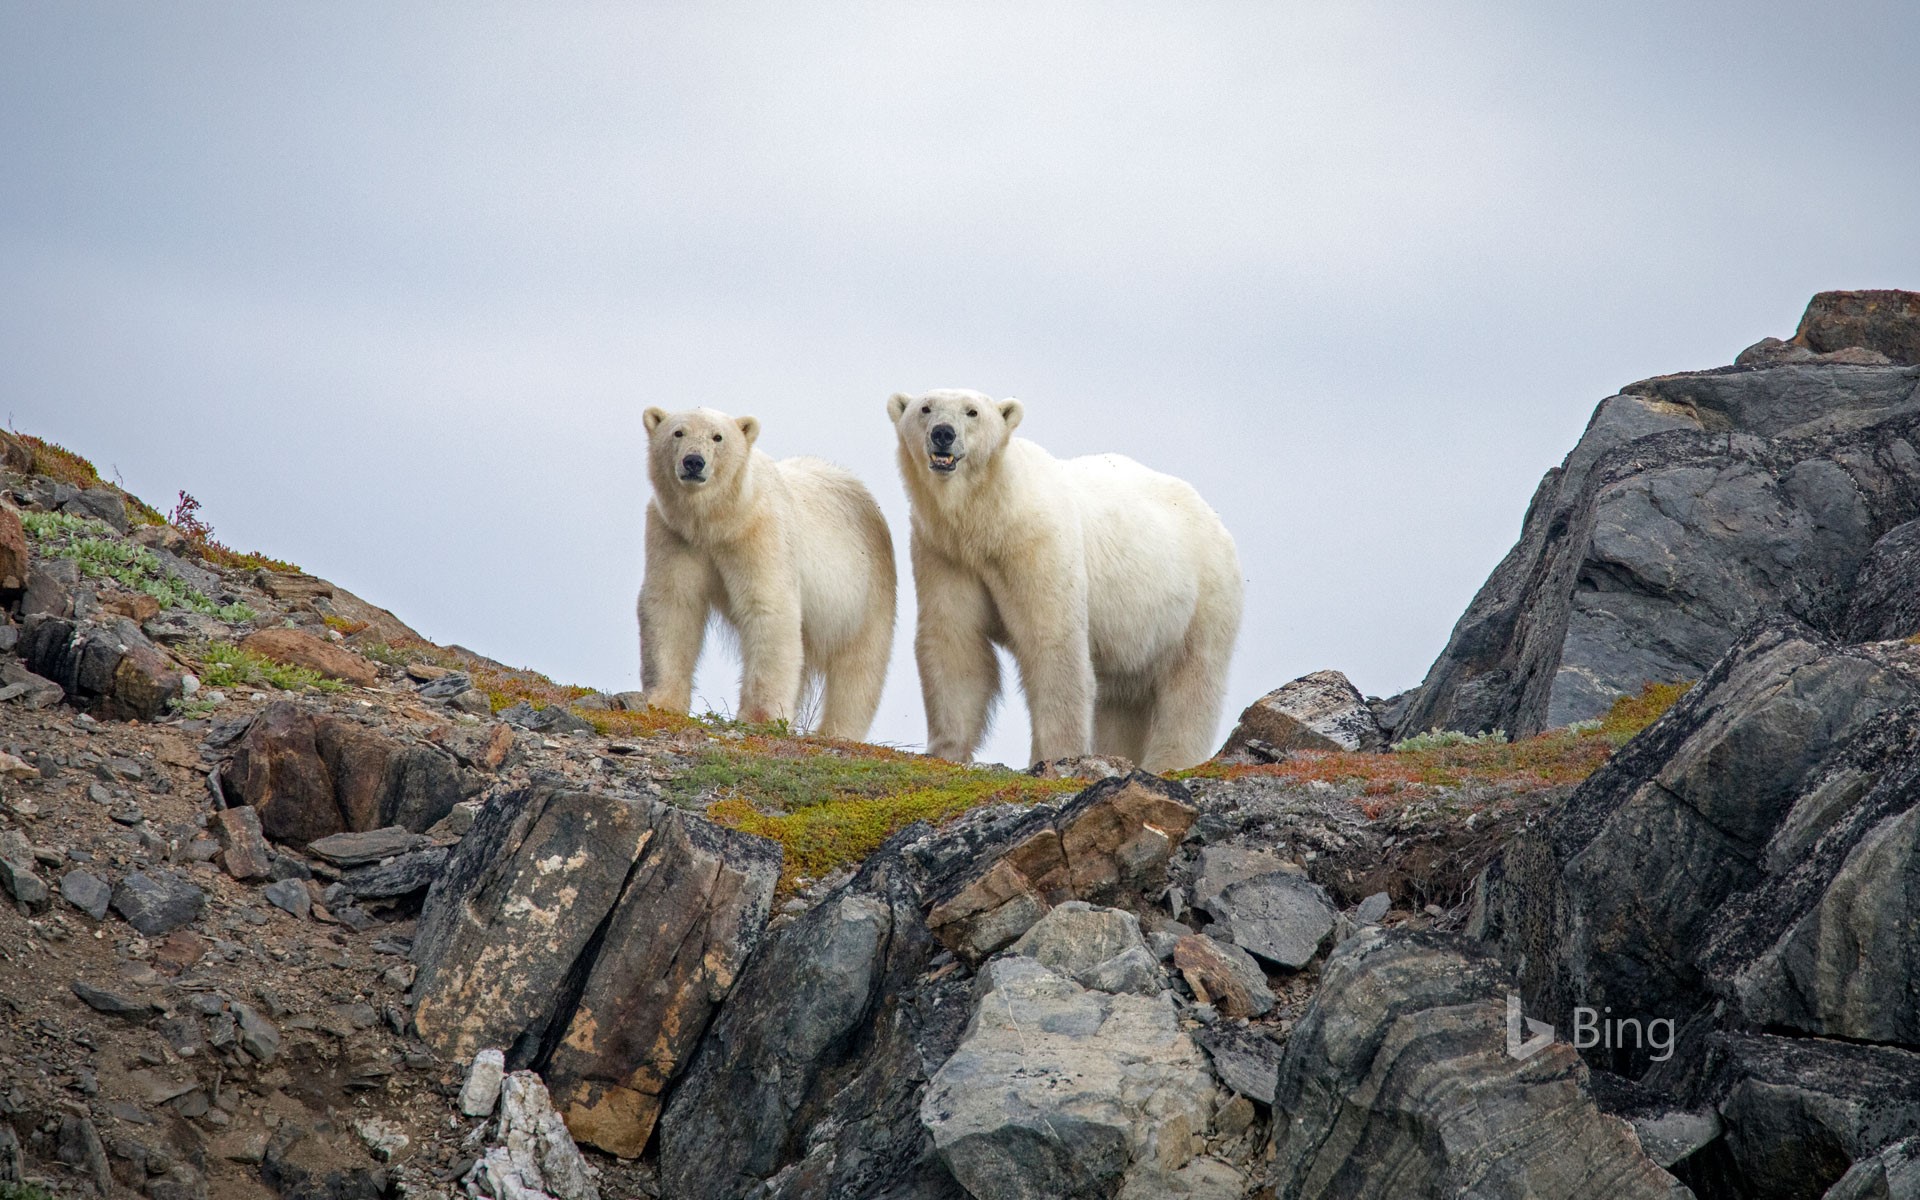 Polar bears in Torngat Mountains National Park, Canada